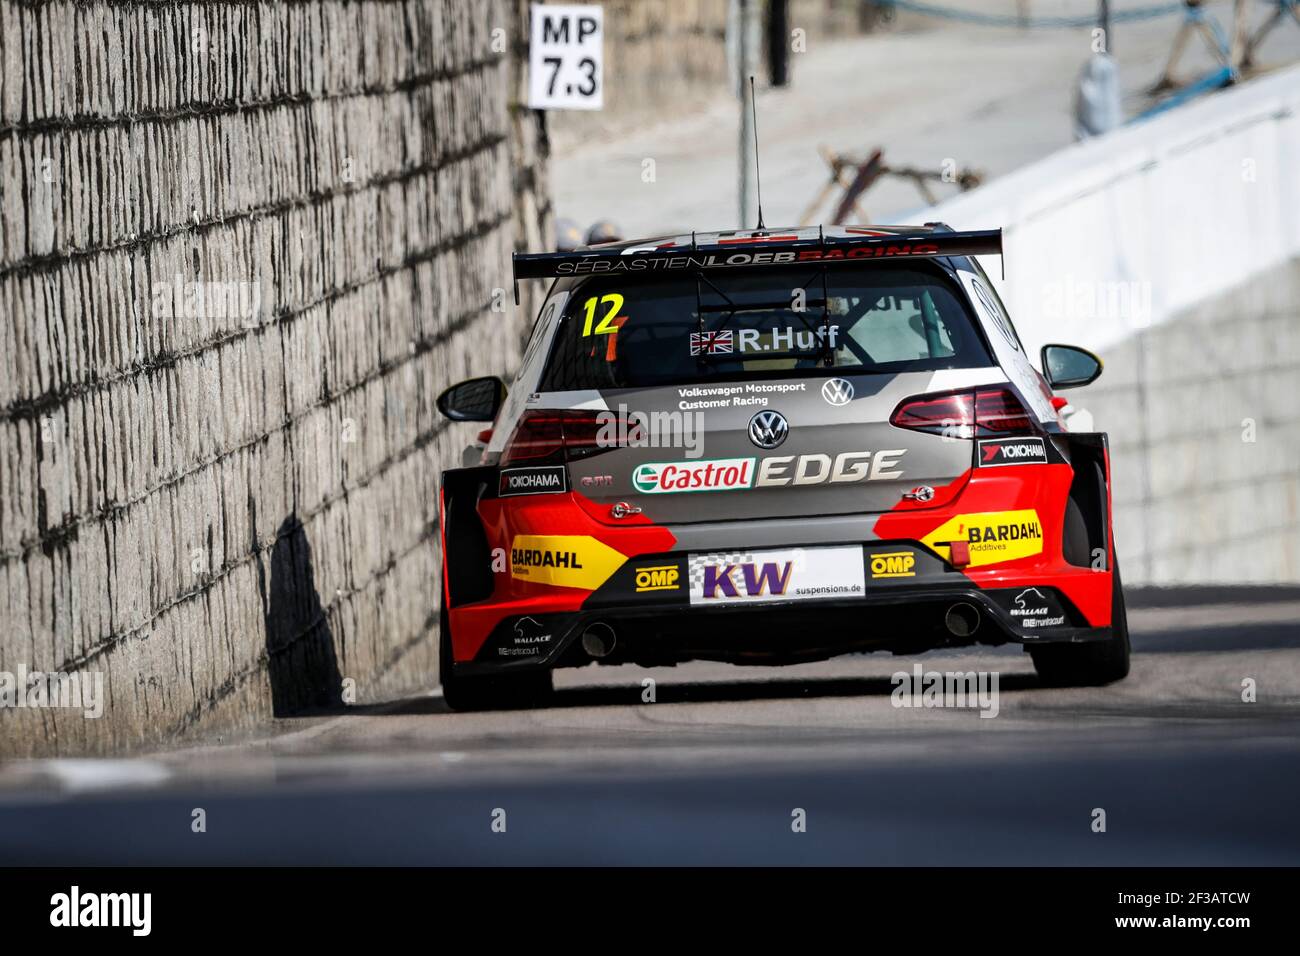 12 HUFF Rob, (GRB), SLR VW Motorsport, Volkswagen Golf Gti TCR, action  during the 2019 FIA